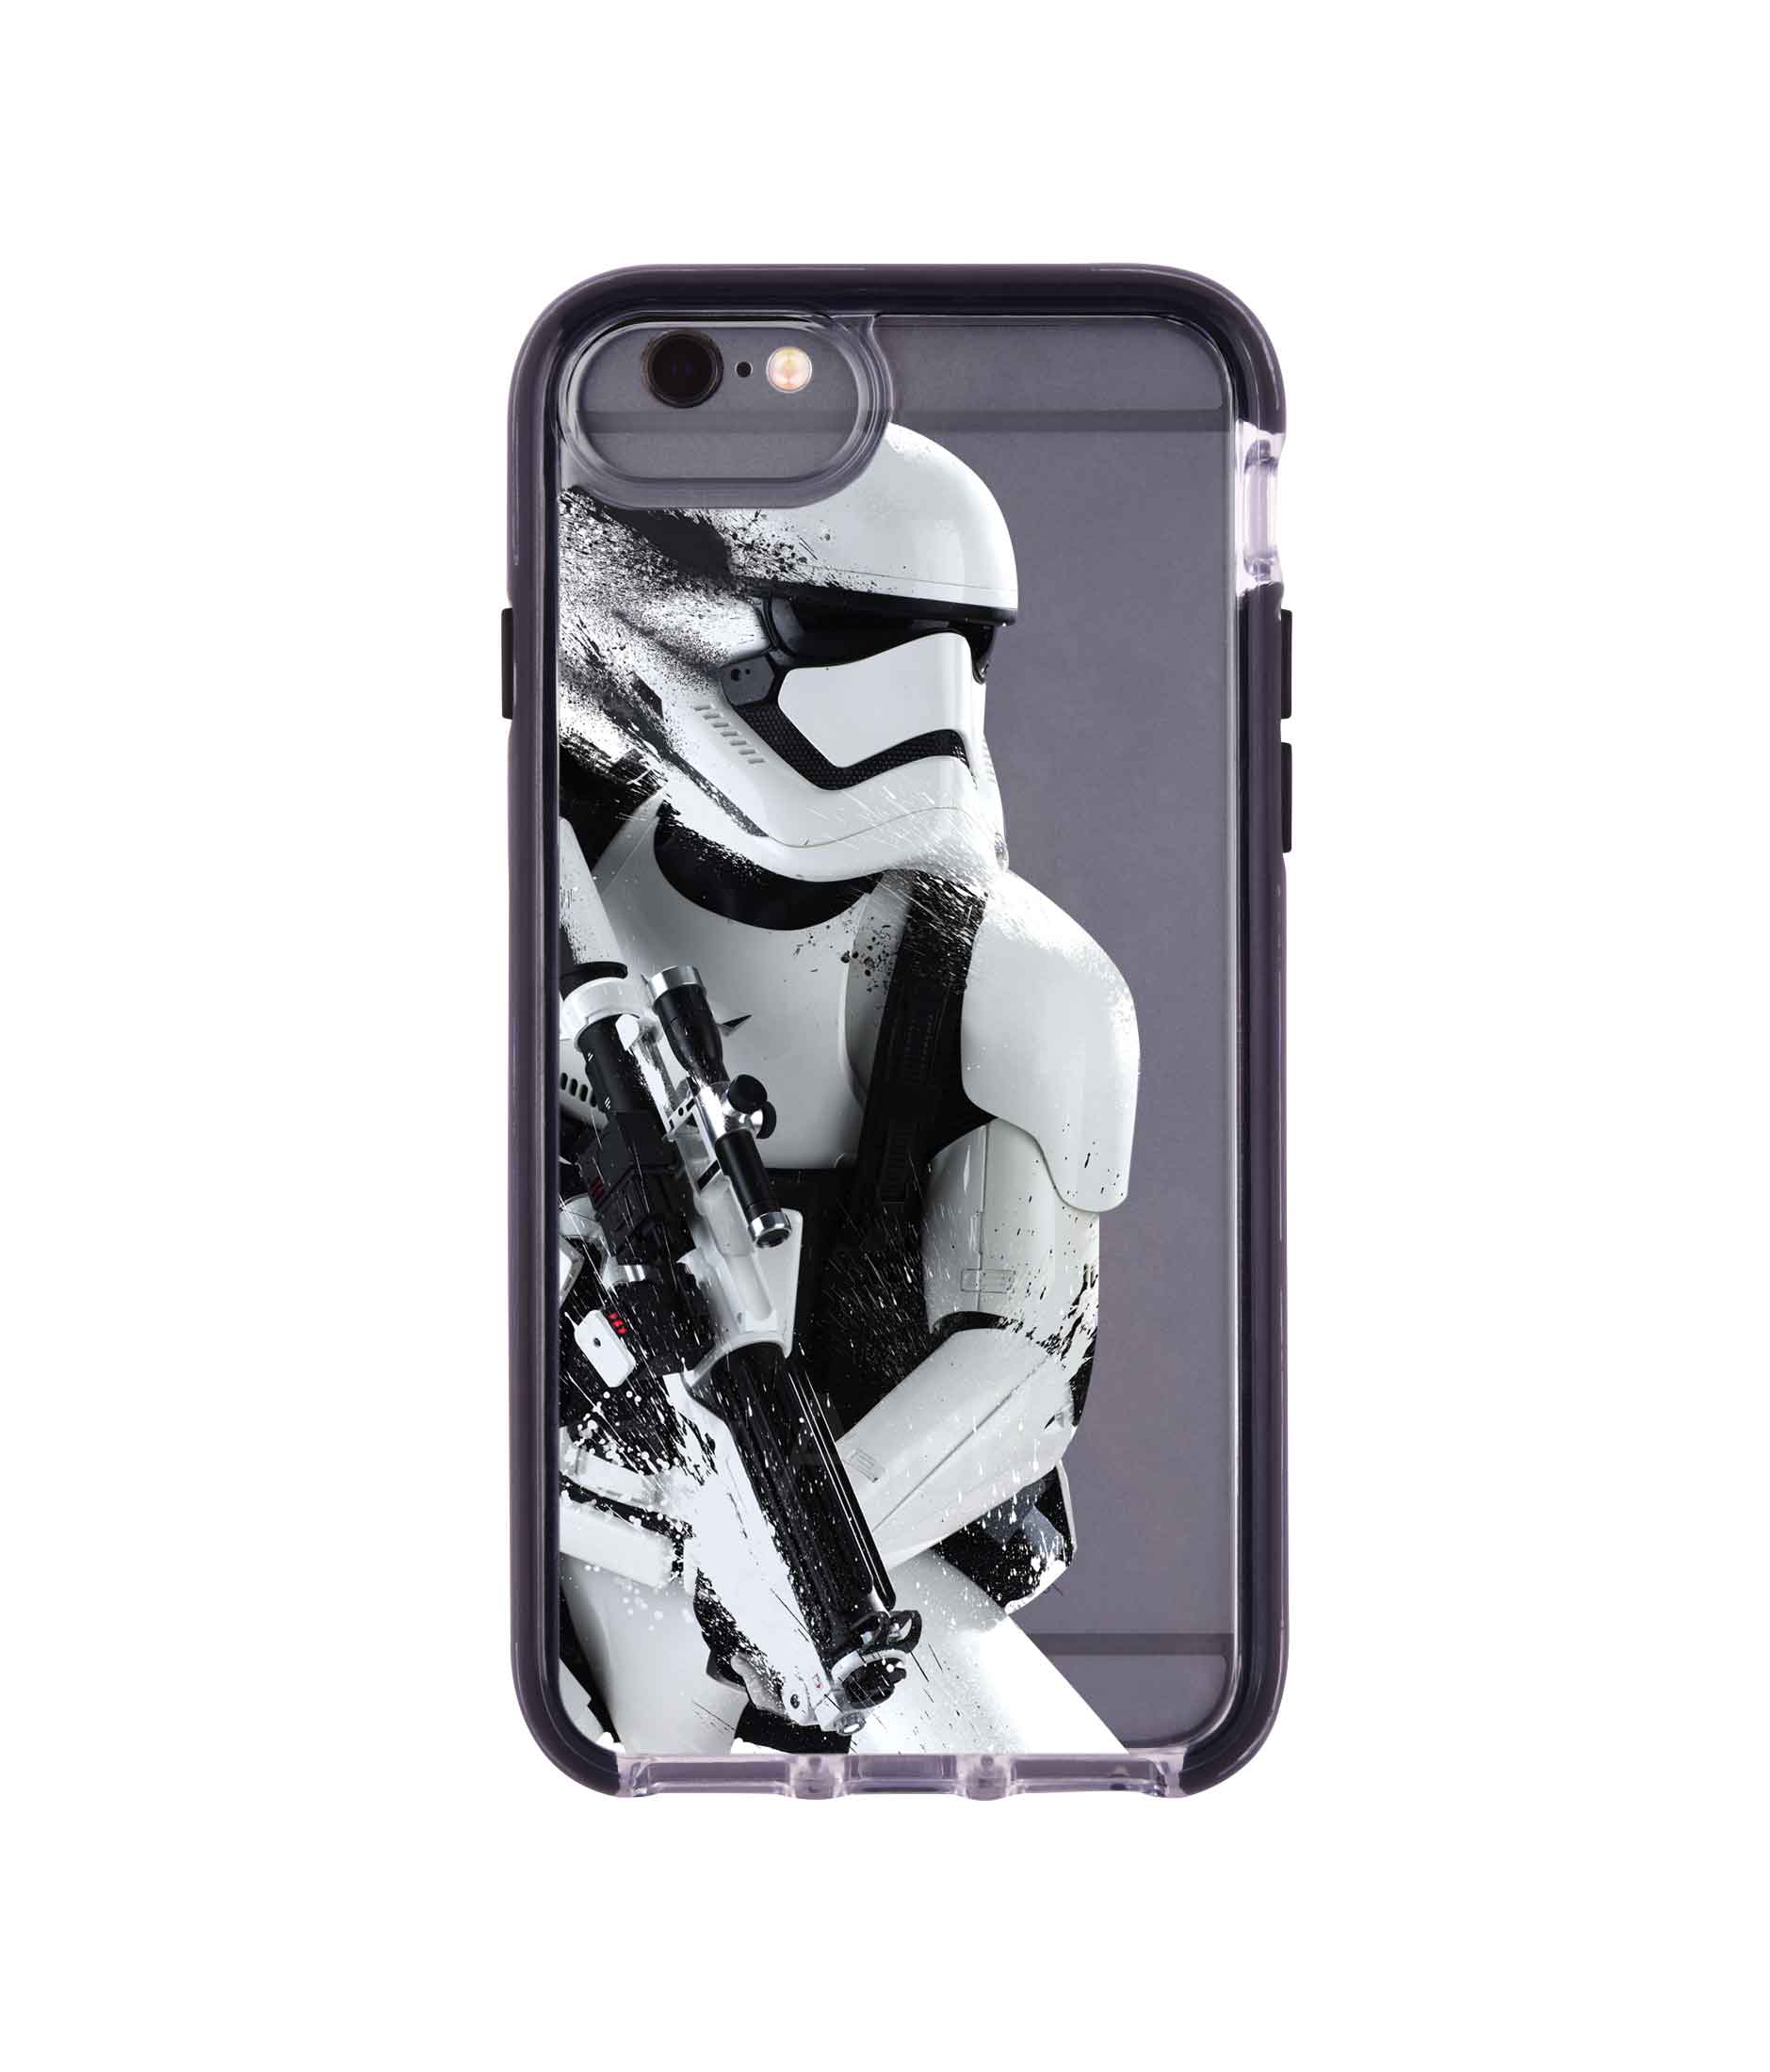 Trooper Storm - Extreme Phone Case for iPhone 6